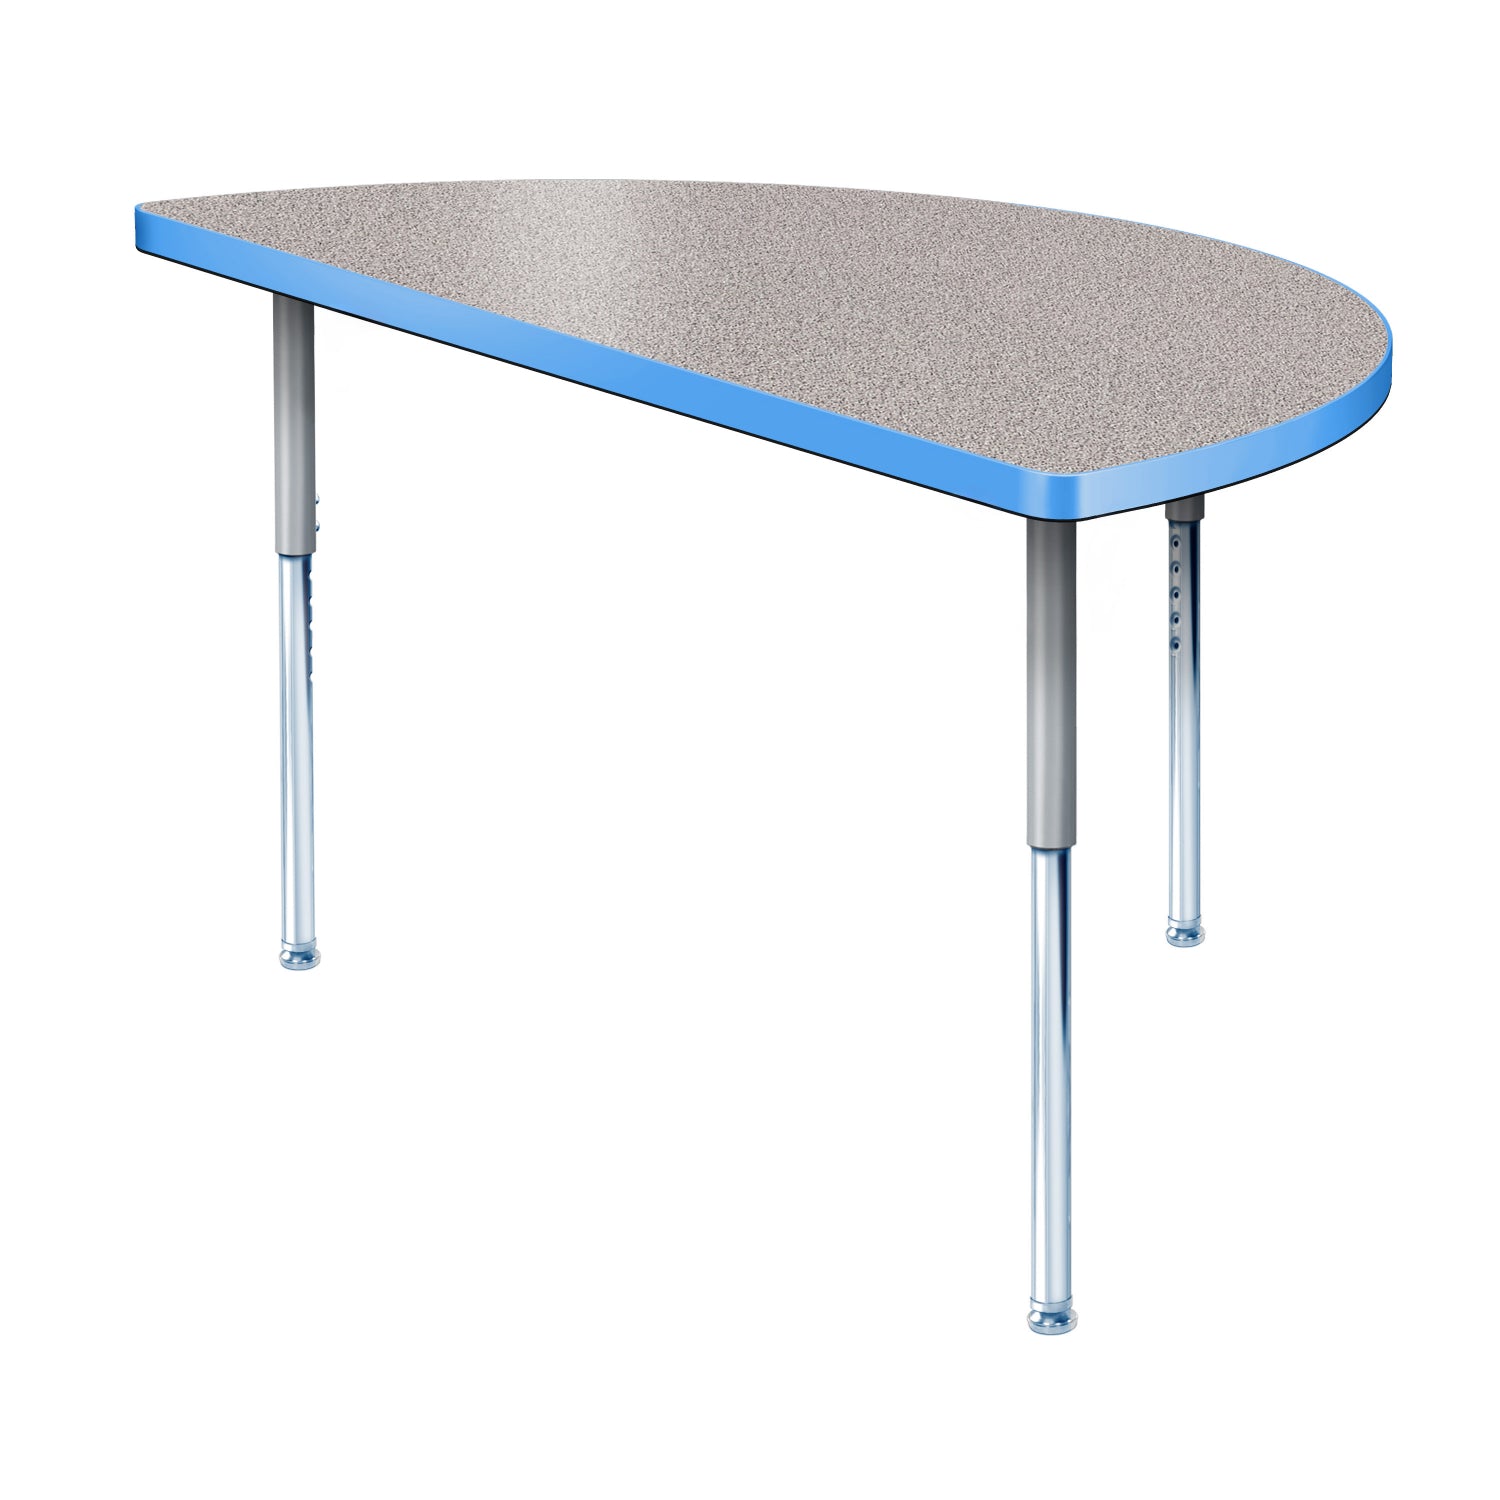 Modern Classic Series 48" Half Round Activity Table with High Pressure Laminate Top, Adjustable Height Legs